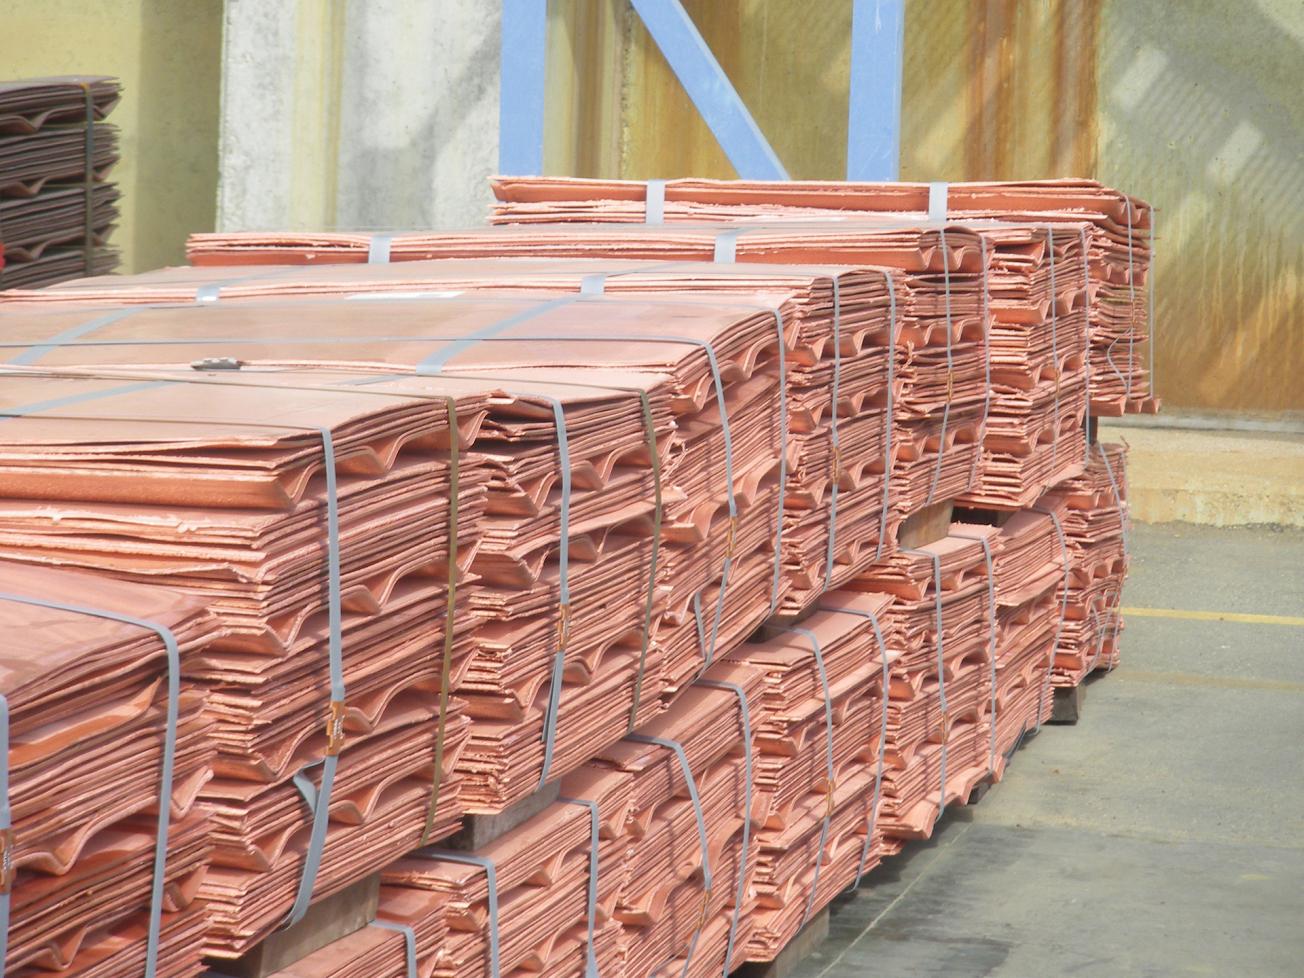 Copper cathodes from the Las Cruces mine